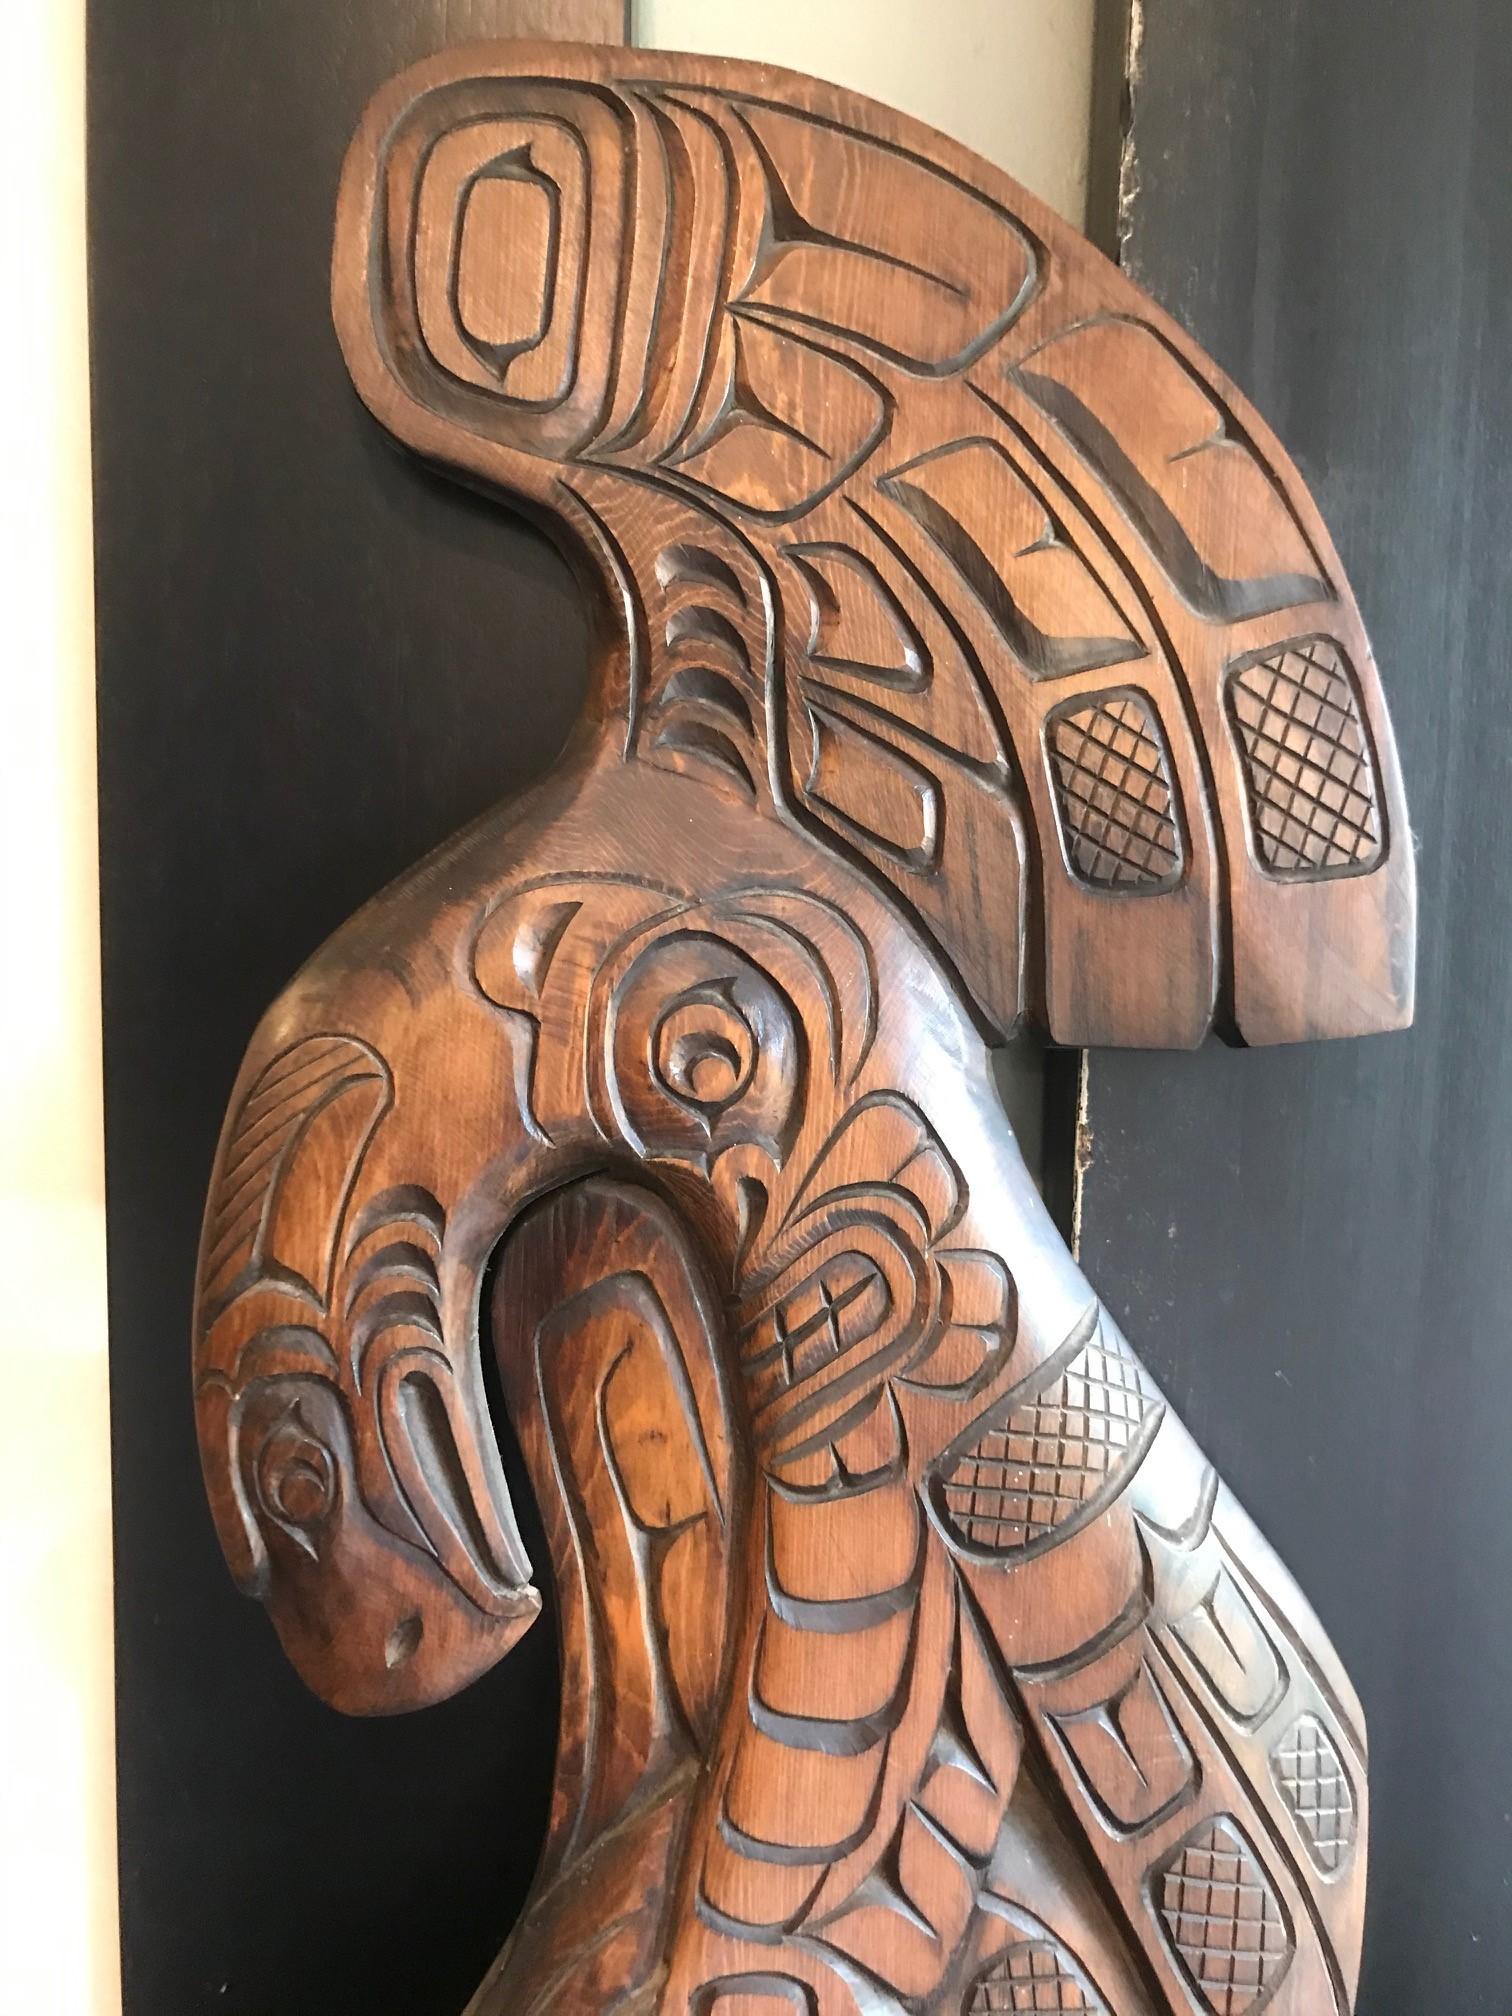 A wonderful example of true indigenous first nations Pacific Northwest Coast art by Robert (Bob) Whonnock. This carved wood panel shows an eagle and orca motif in exceptional detail. The wood has a lustrous, rich brown patina.

Robert Whonnock is